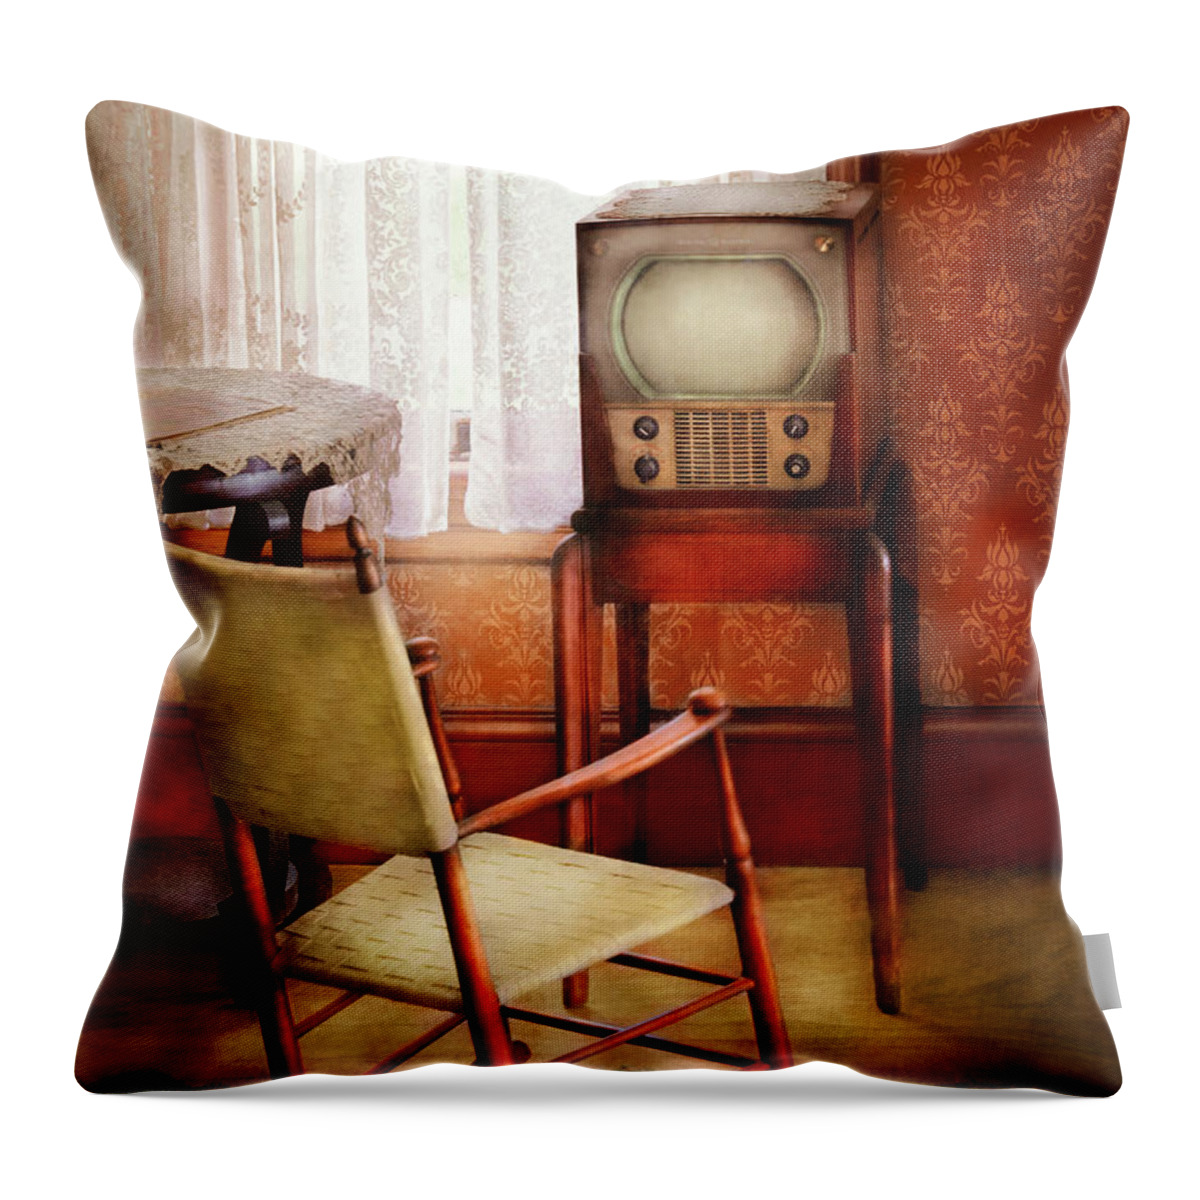 Tv Throw Pillow featuring the photograph Furniture - Chair - The Invention of Television by Mike Savad